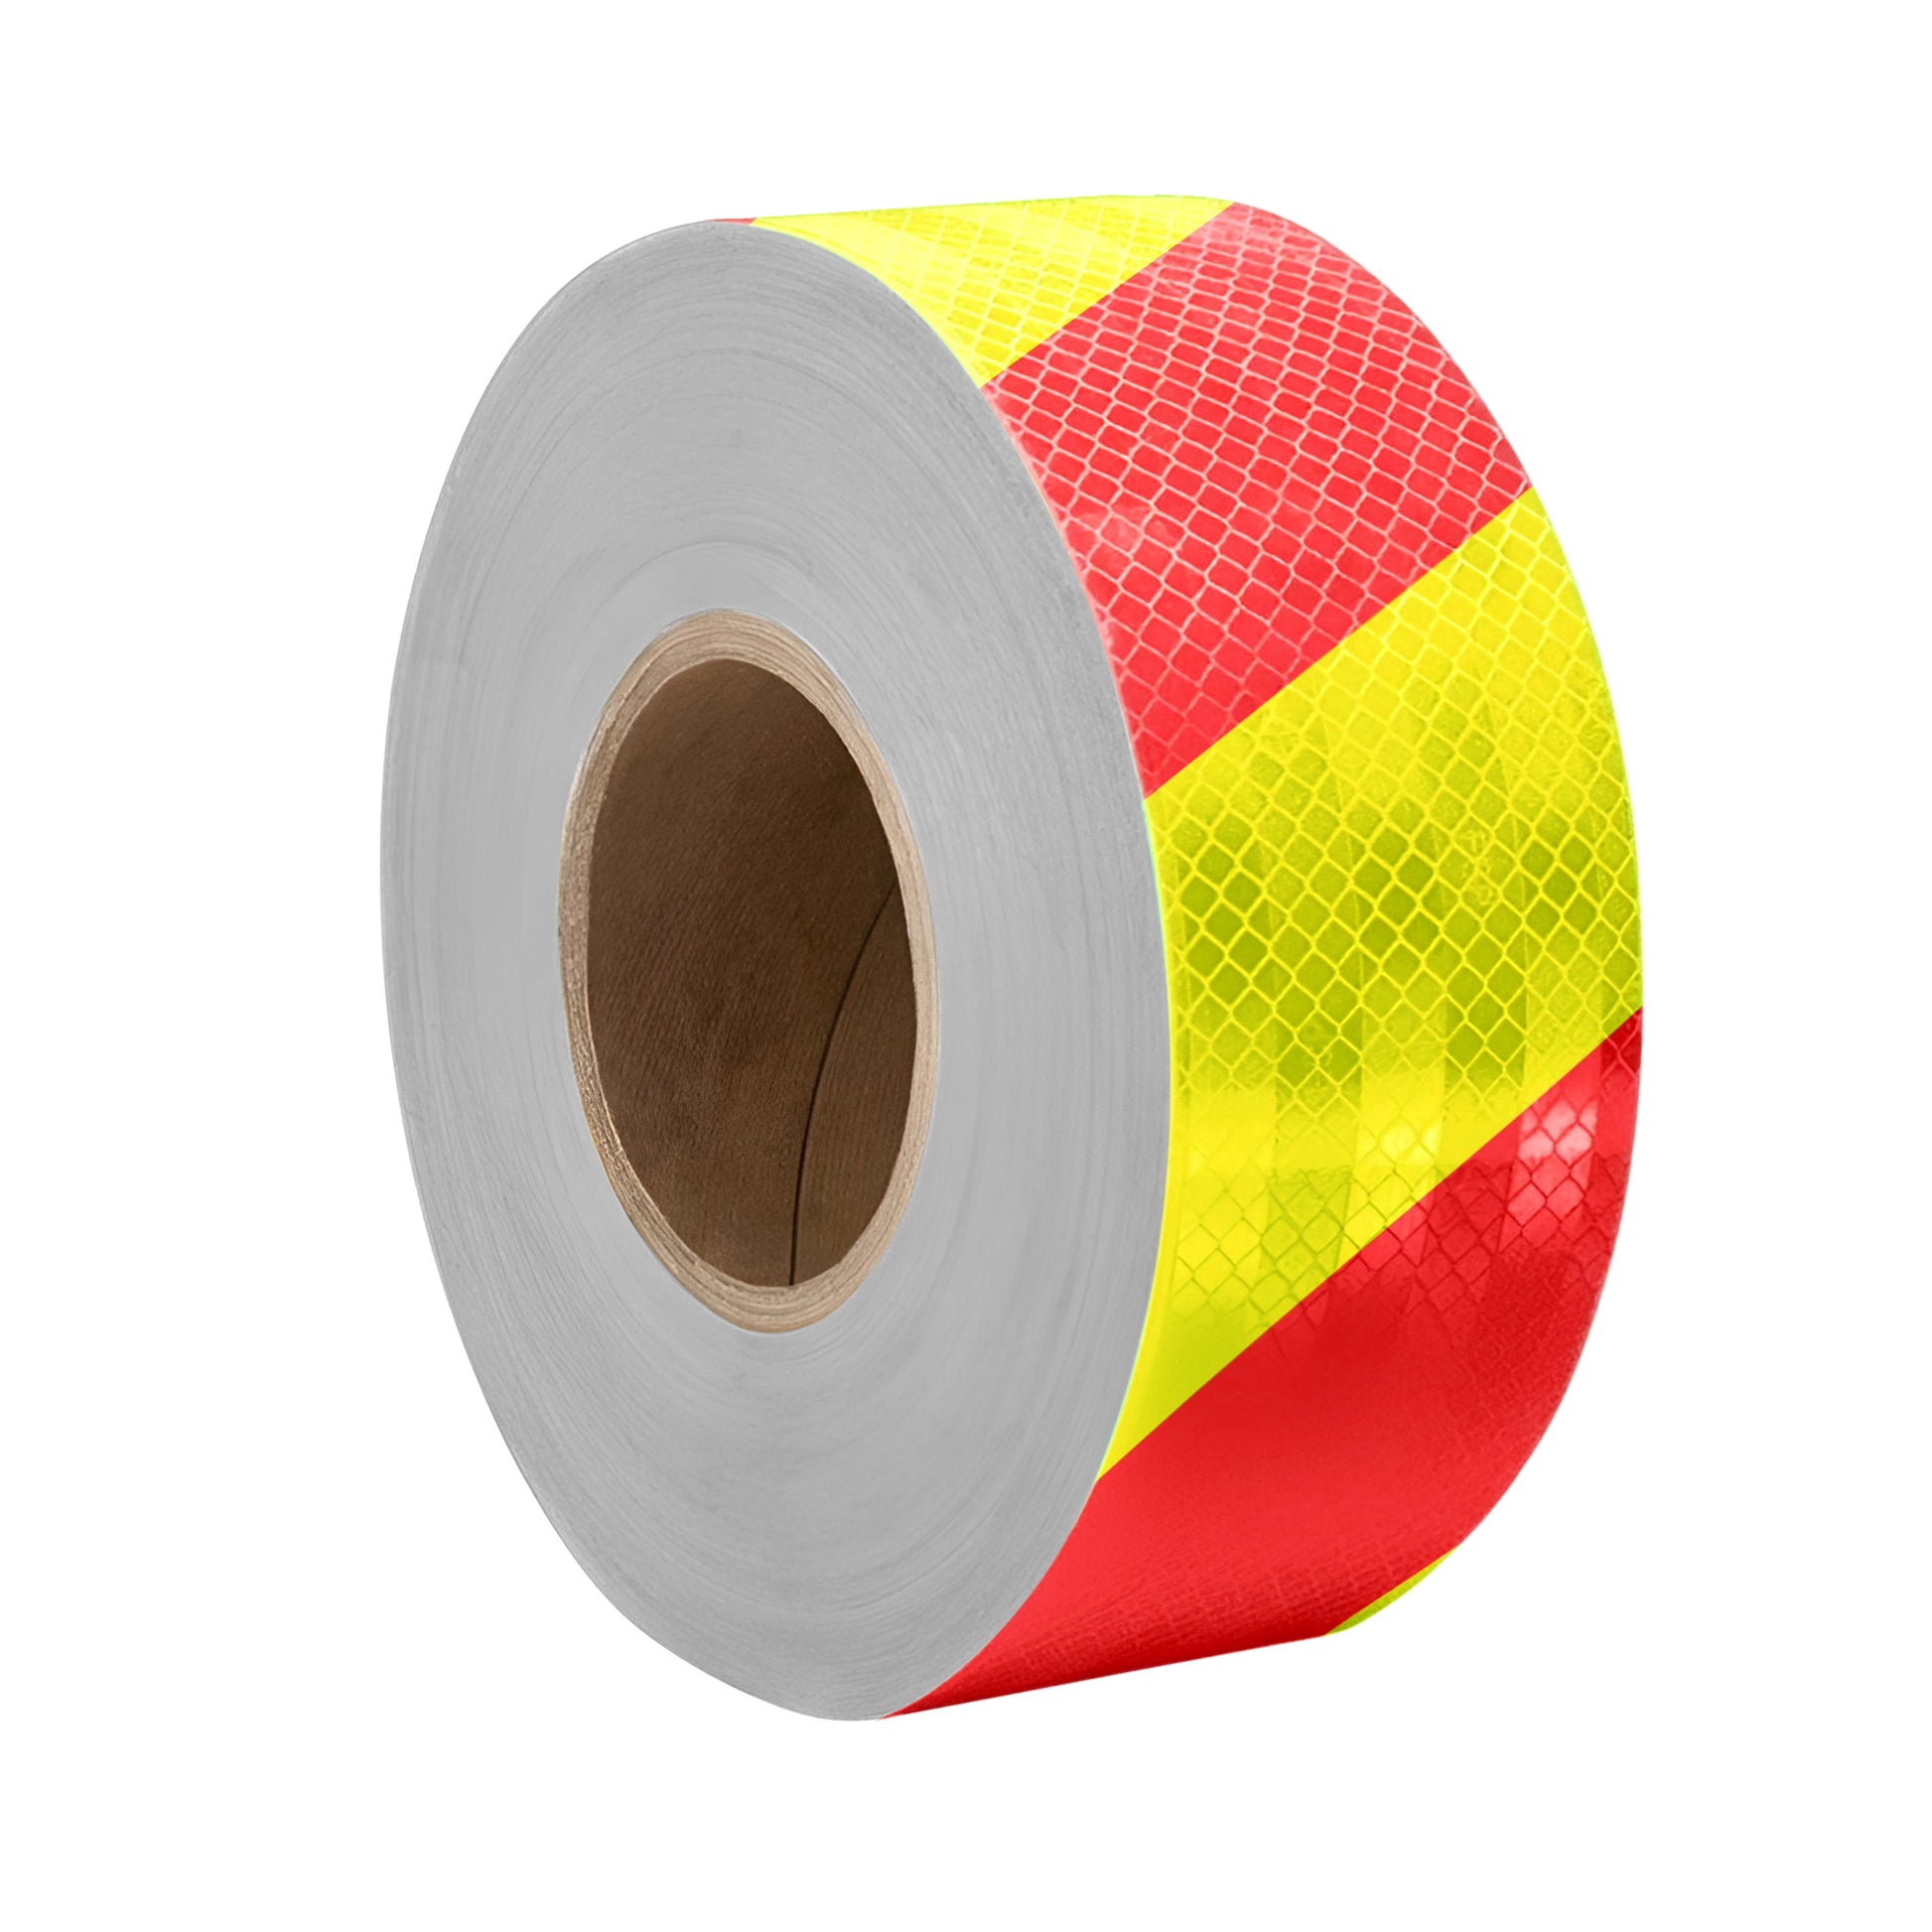 Waterproof Reflective Safety Tape Floor Marking Self-Adhesive Roll~5191